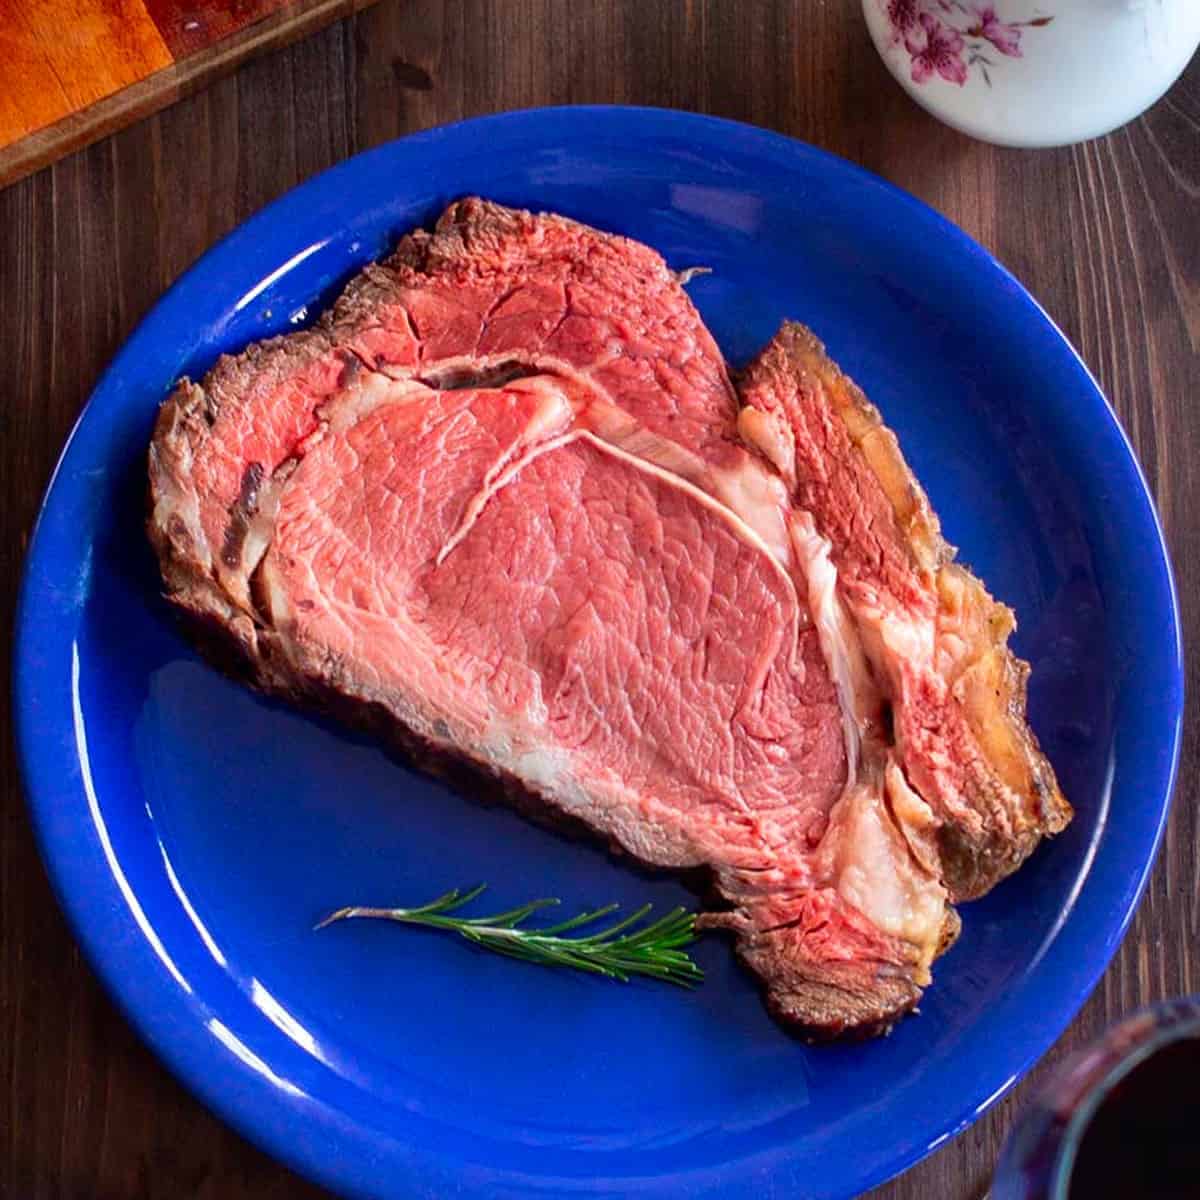 Slice of instant pot prime rib on a blue plate